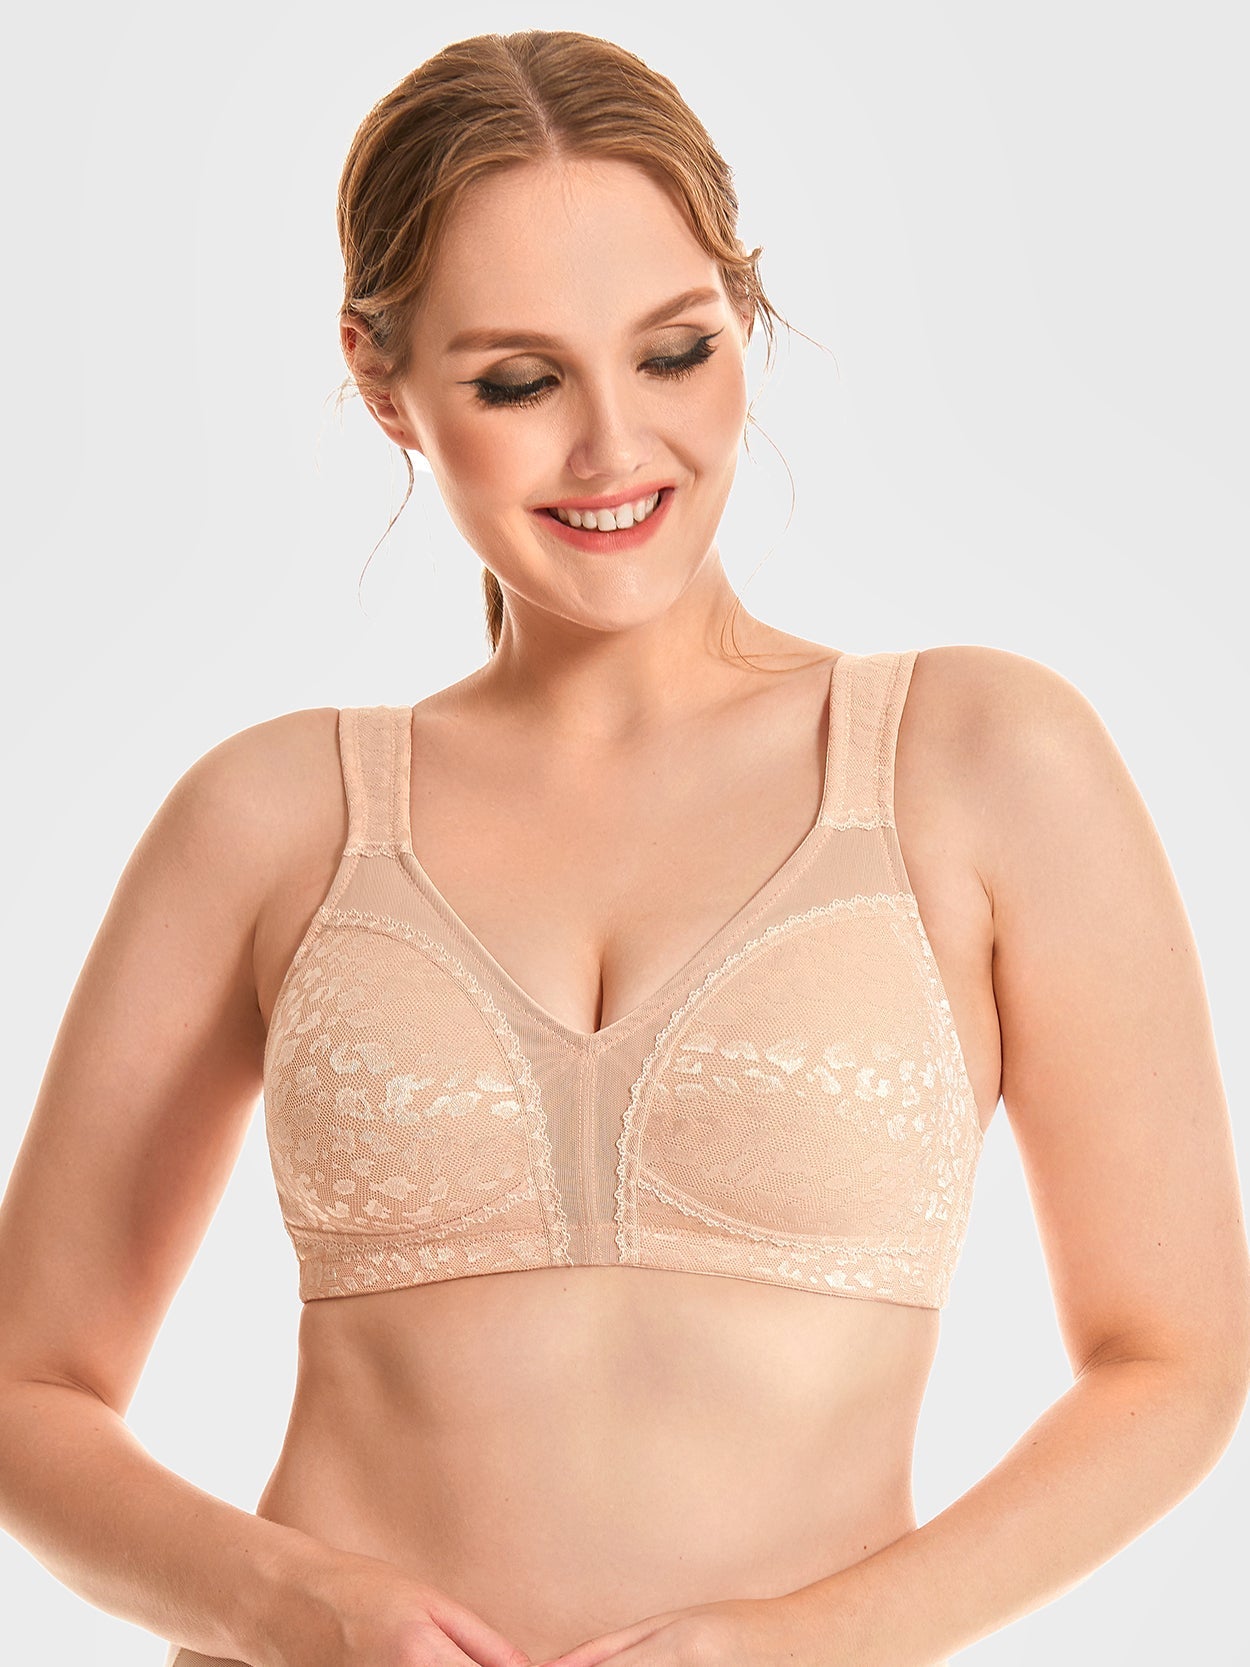 Comfortable Womens Front Closure Bra Full Coverage Non Padded